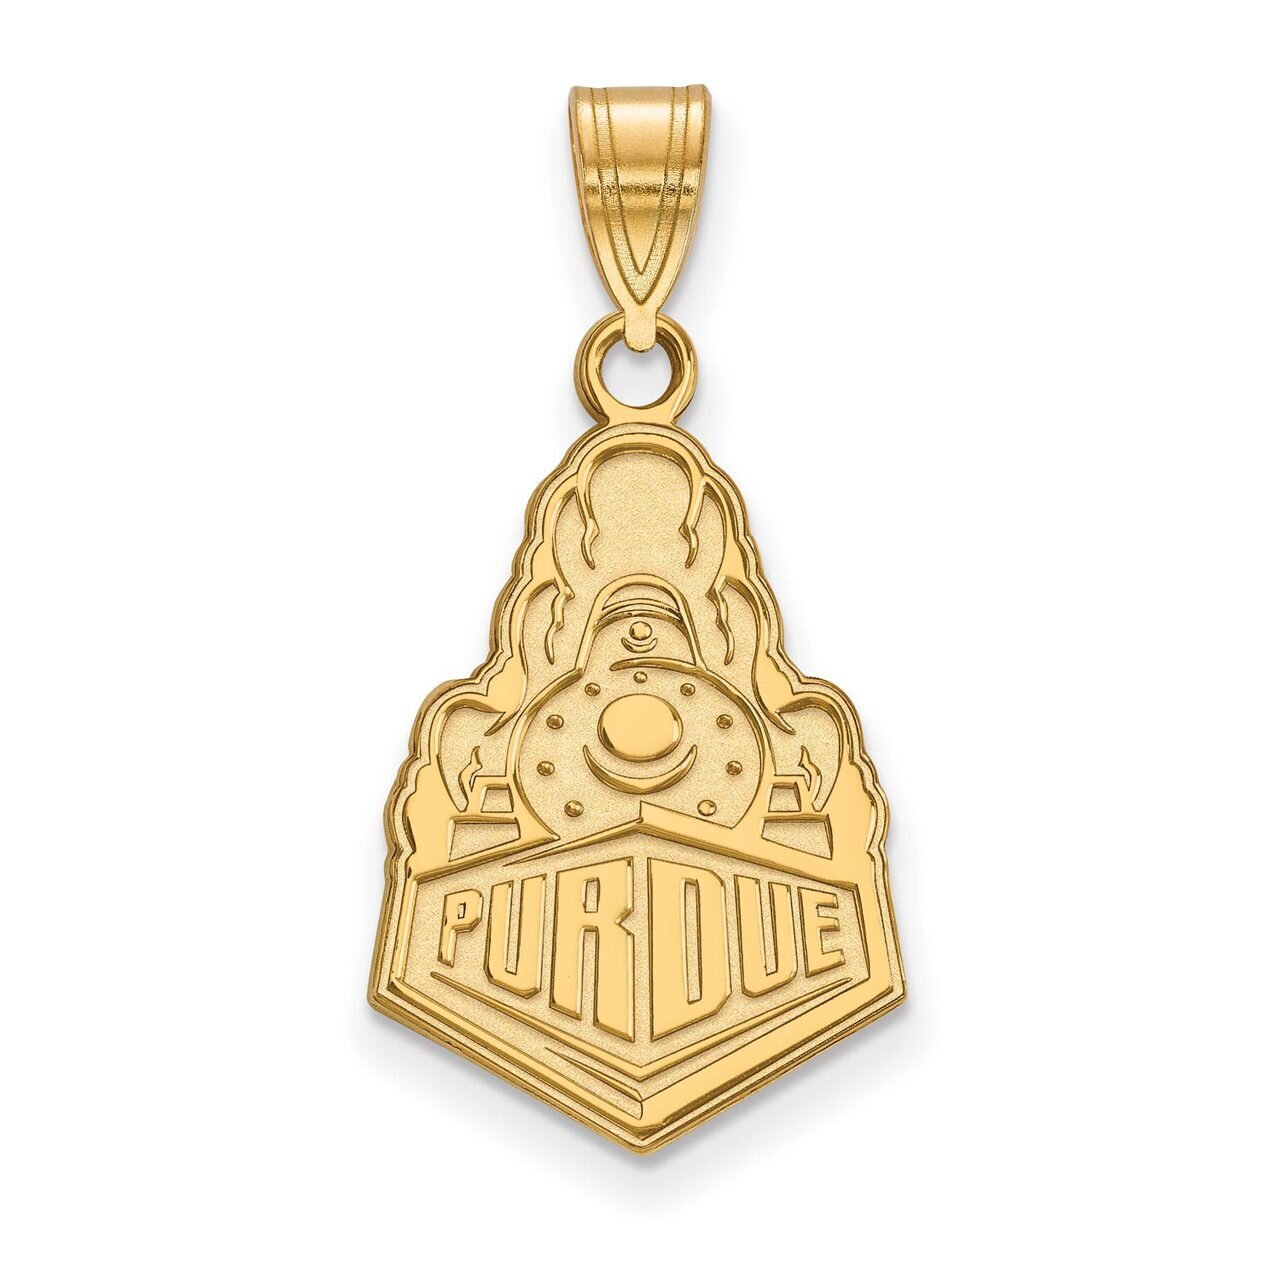 Purdue Large Pendant 10k Yellow Gold 1Y039PU